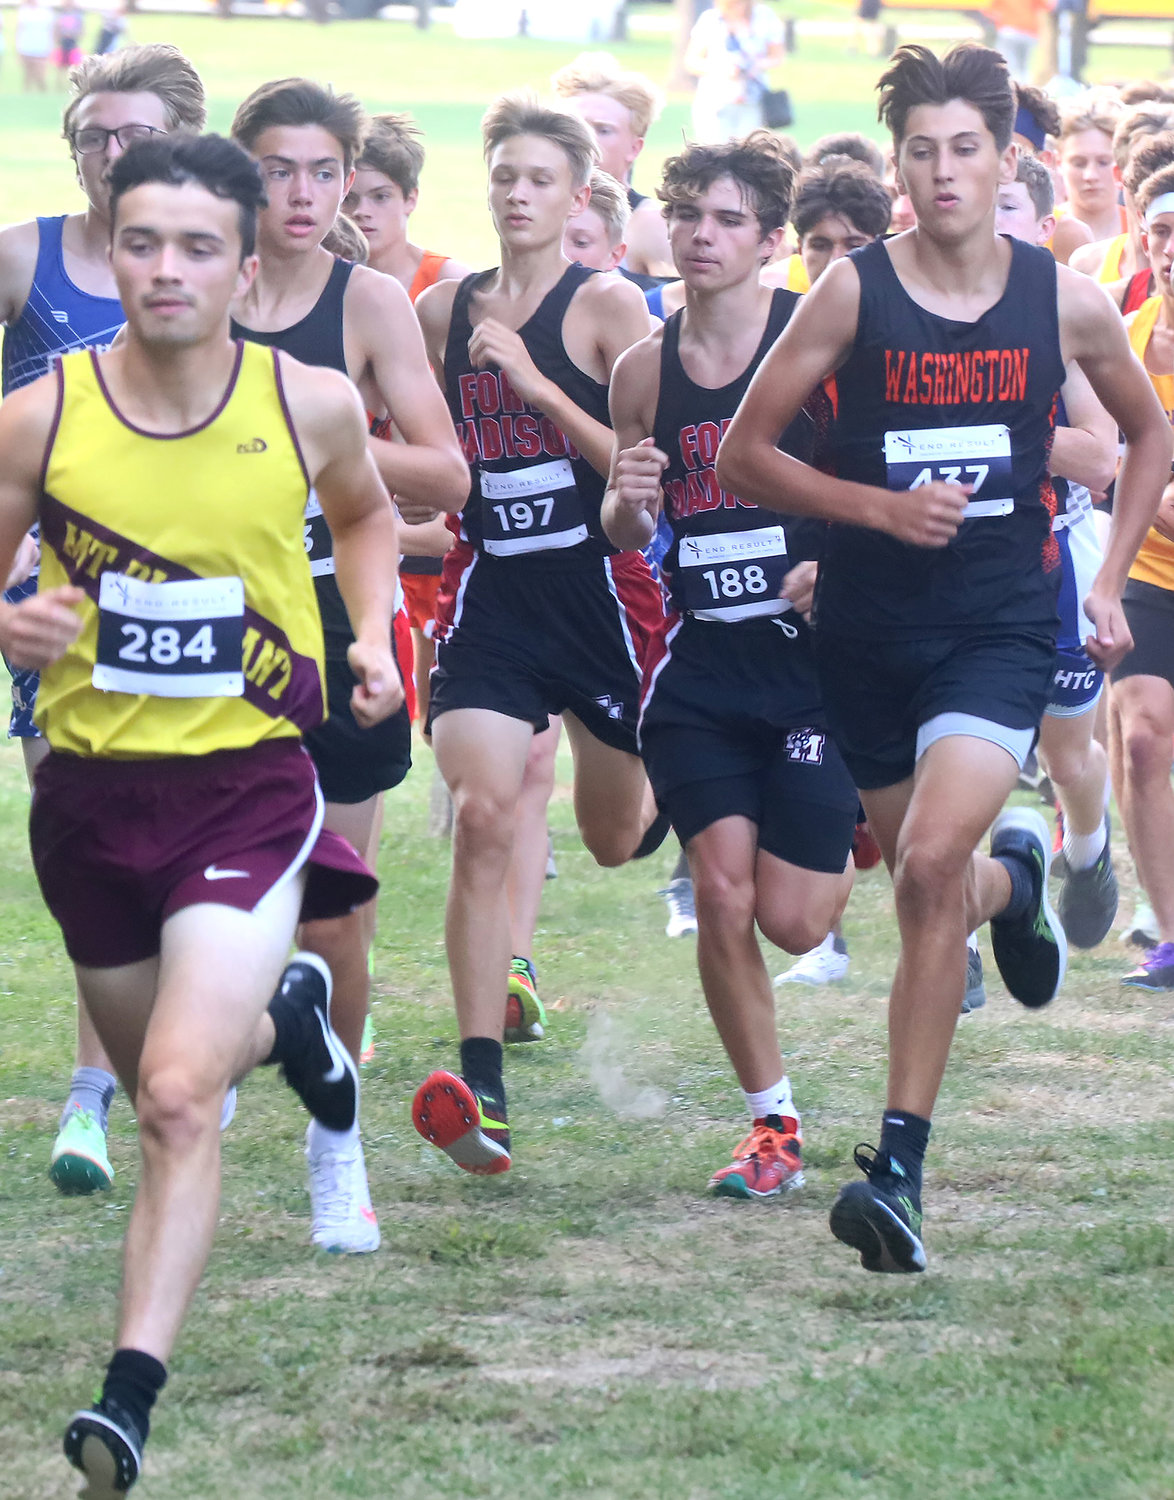 From left to right, in the pack for Fort Madison, Riley Tripp (197) and Mason McLey (188) jockey for position just inside the fence at the Timm Lamb Cross Country Invitational Thursday in Fort Madison.